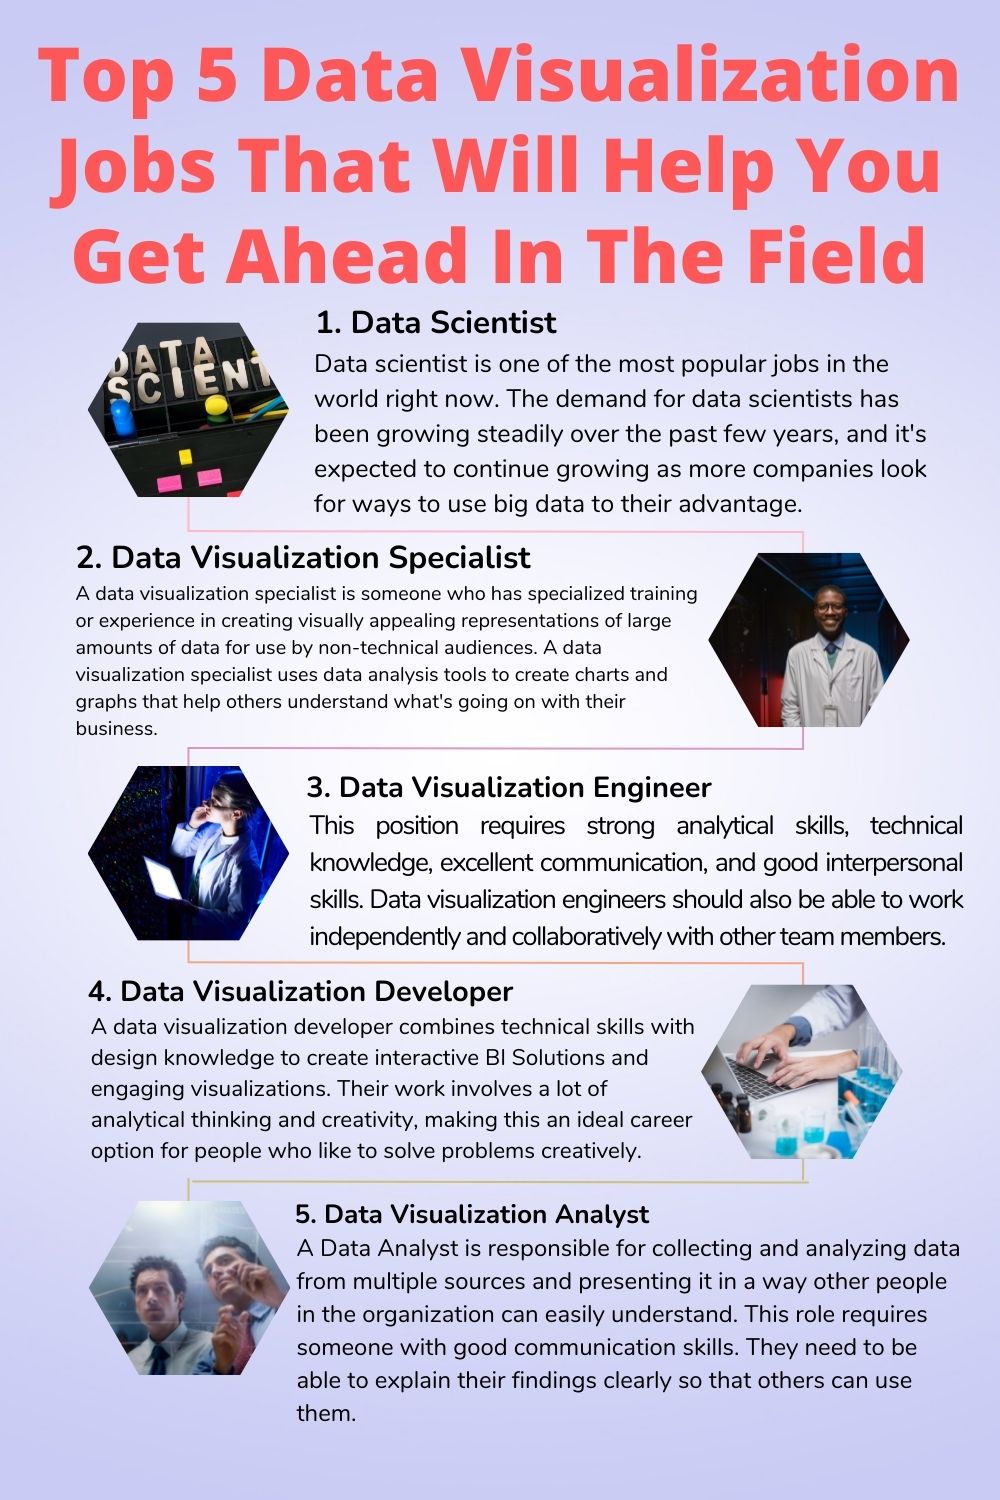 Top 5 Data Visualization Jobs That Will Help You Get Ahead In The Field